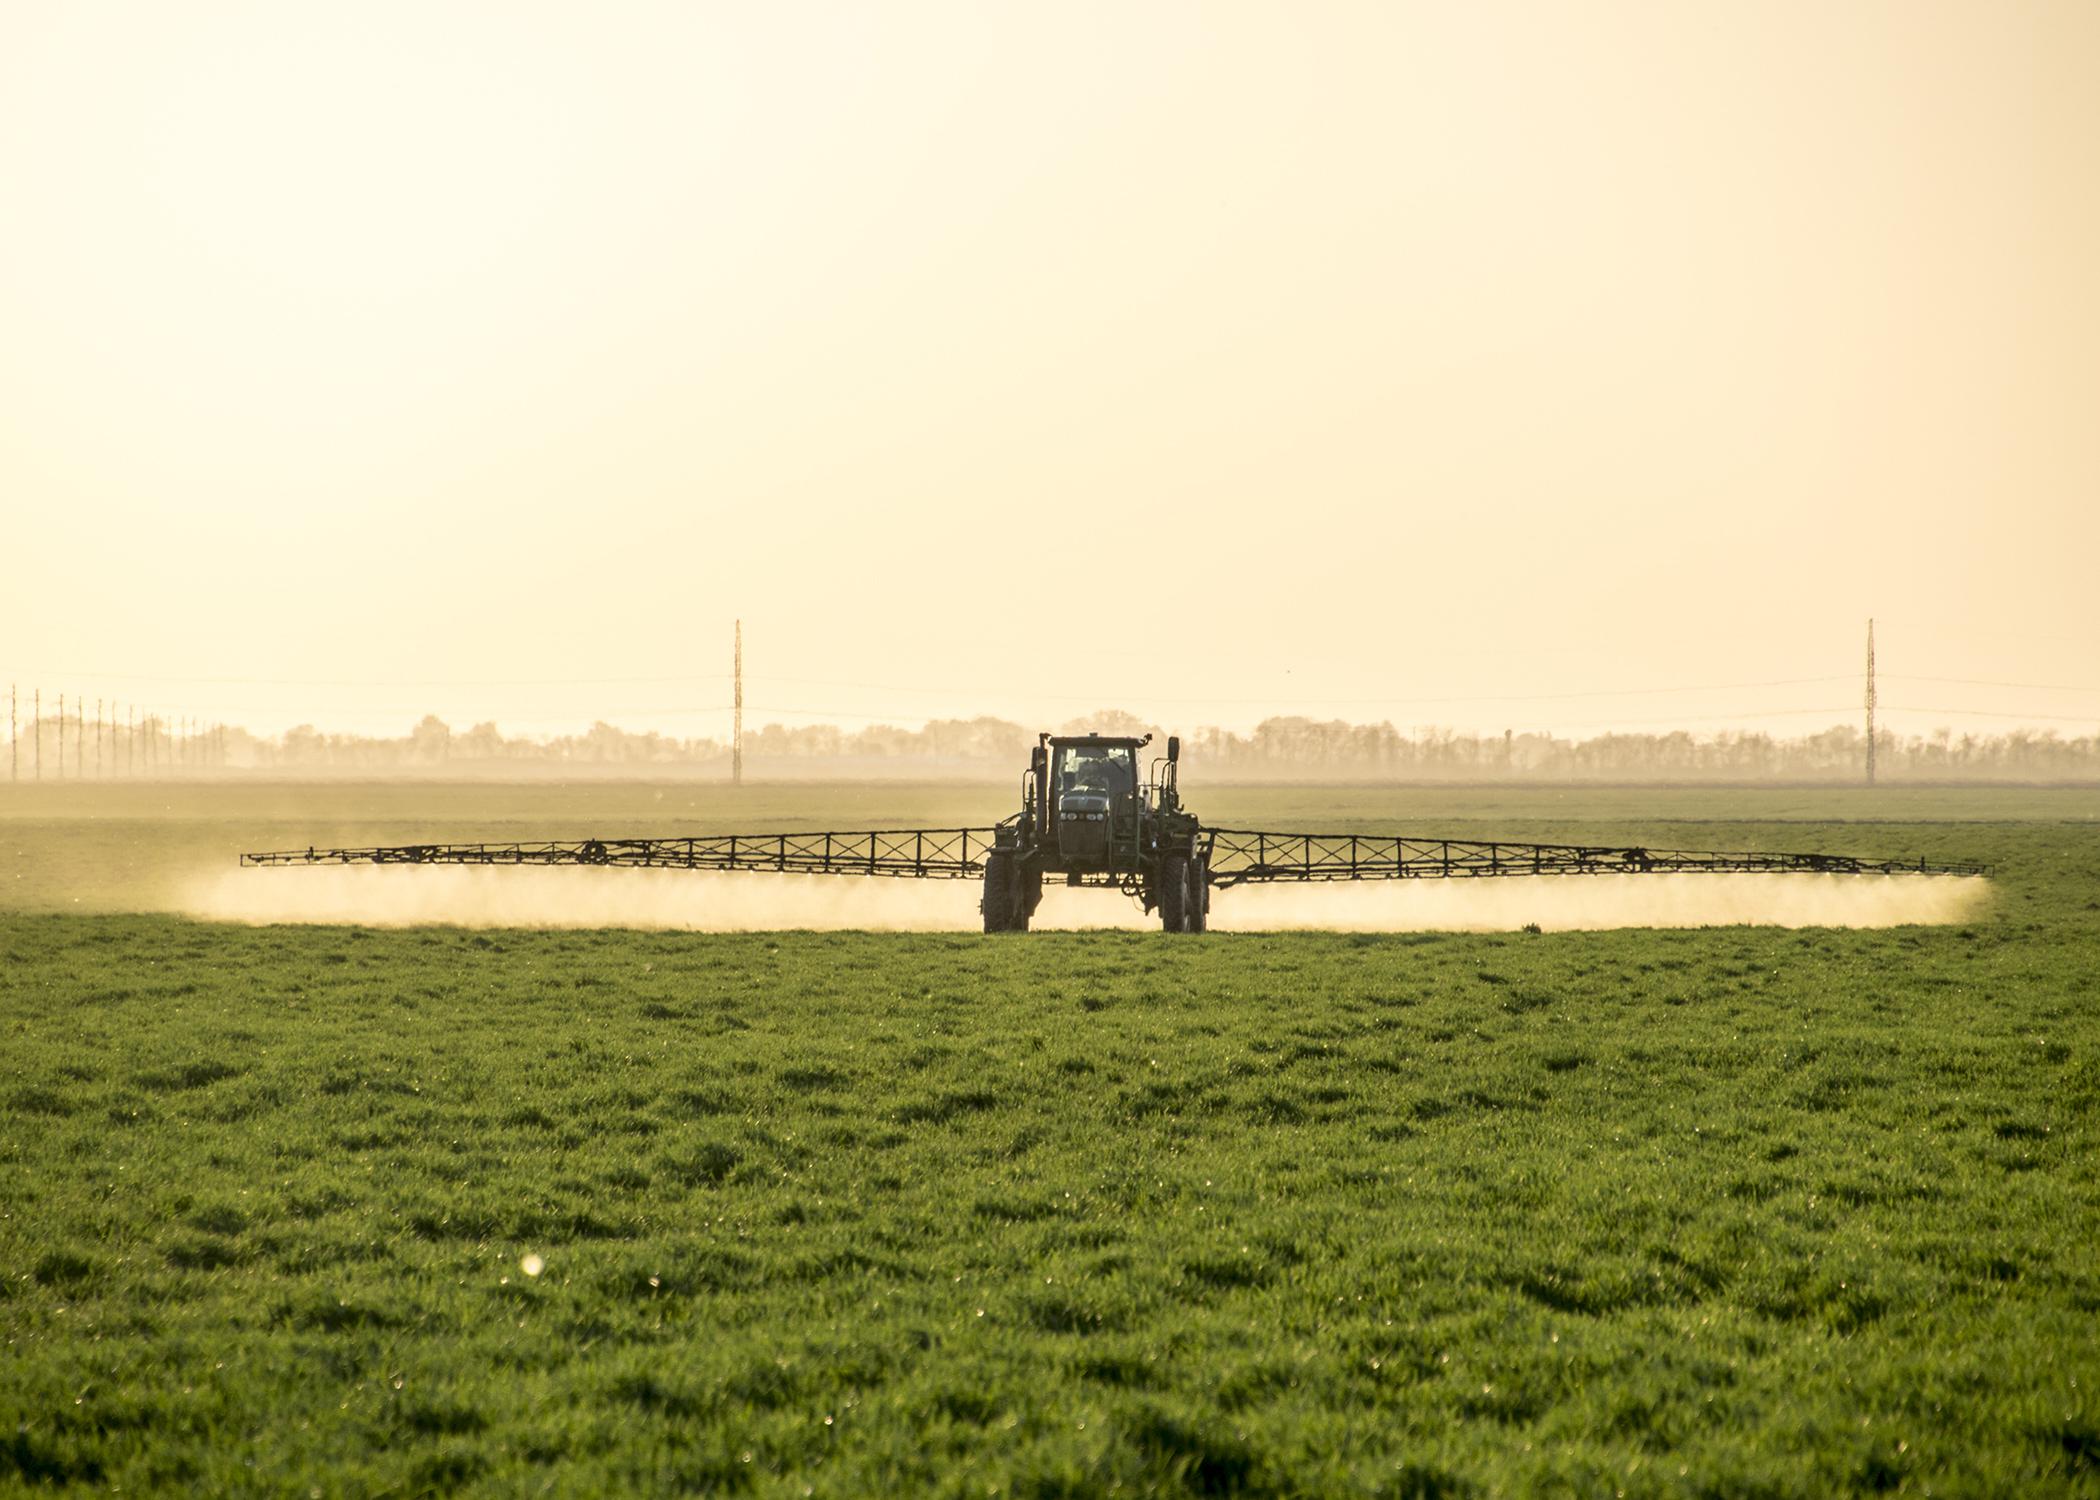 A tractor with a boom arm sprays crops.